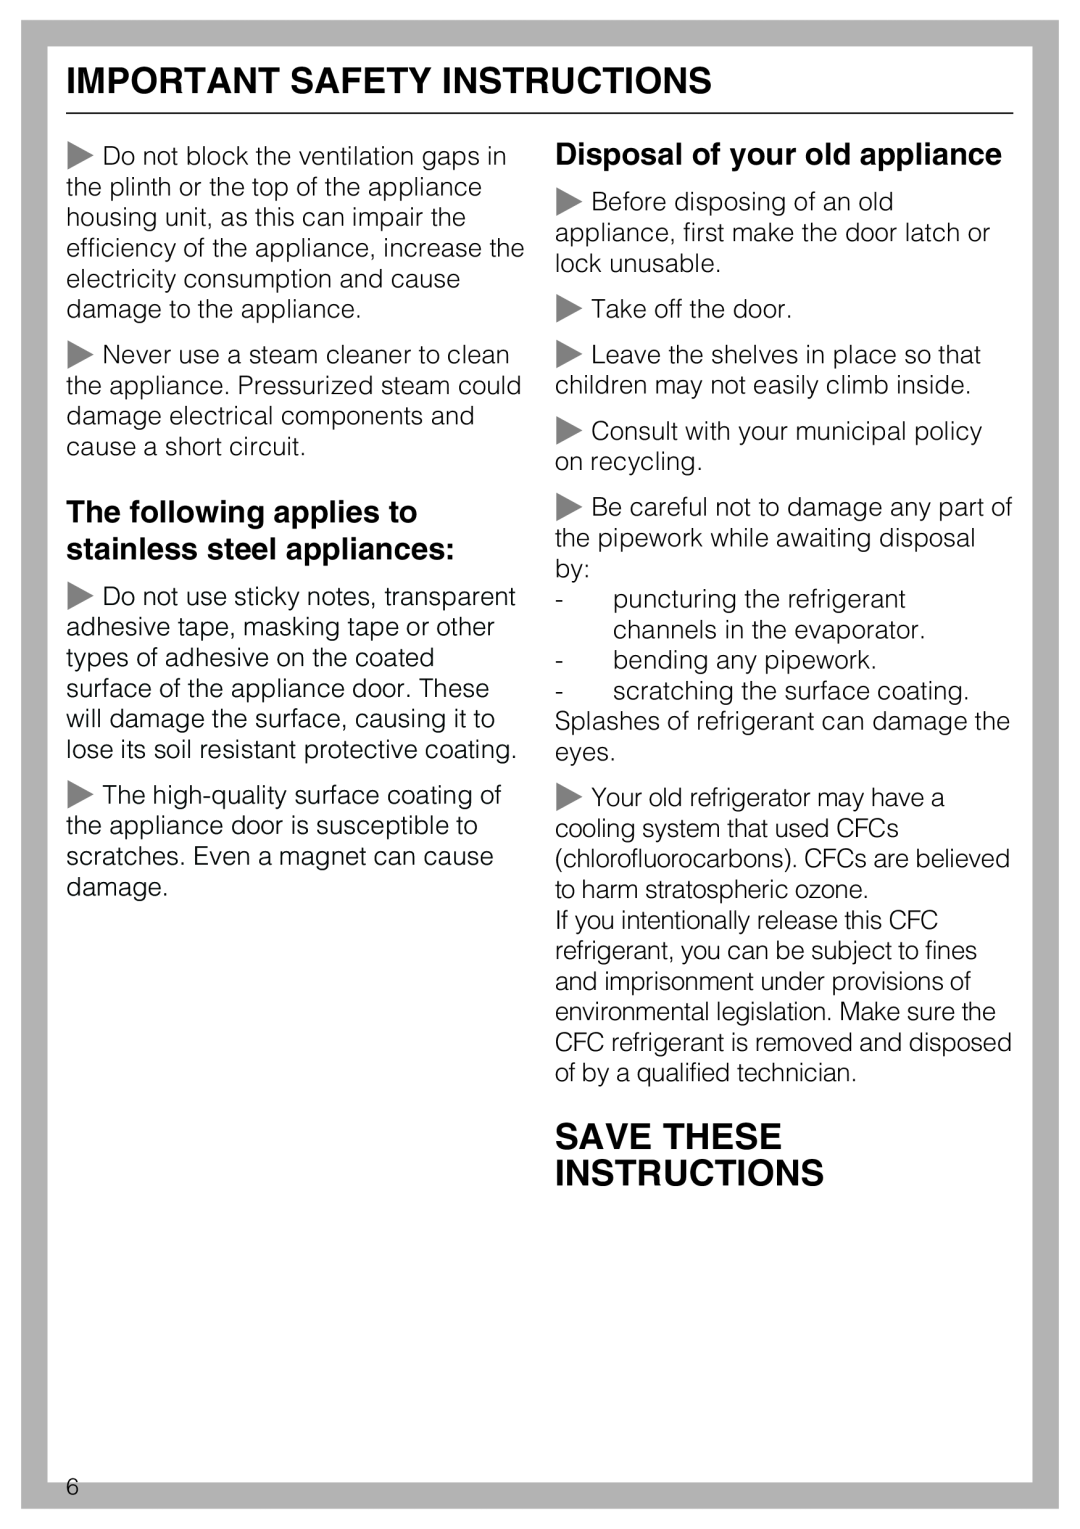 Miele 09 920 570 Save These Instructions, Disposal of your old appliance, Important Safety Instructions 